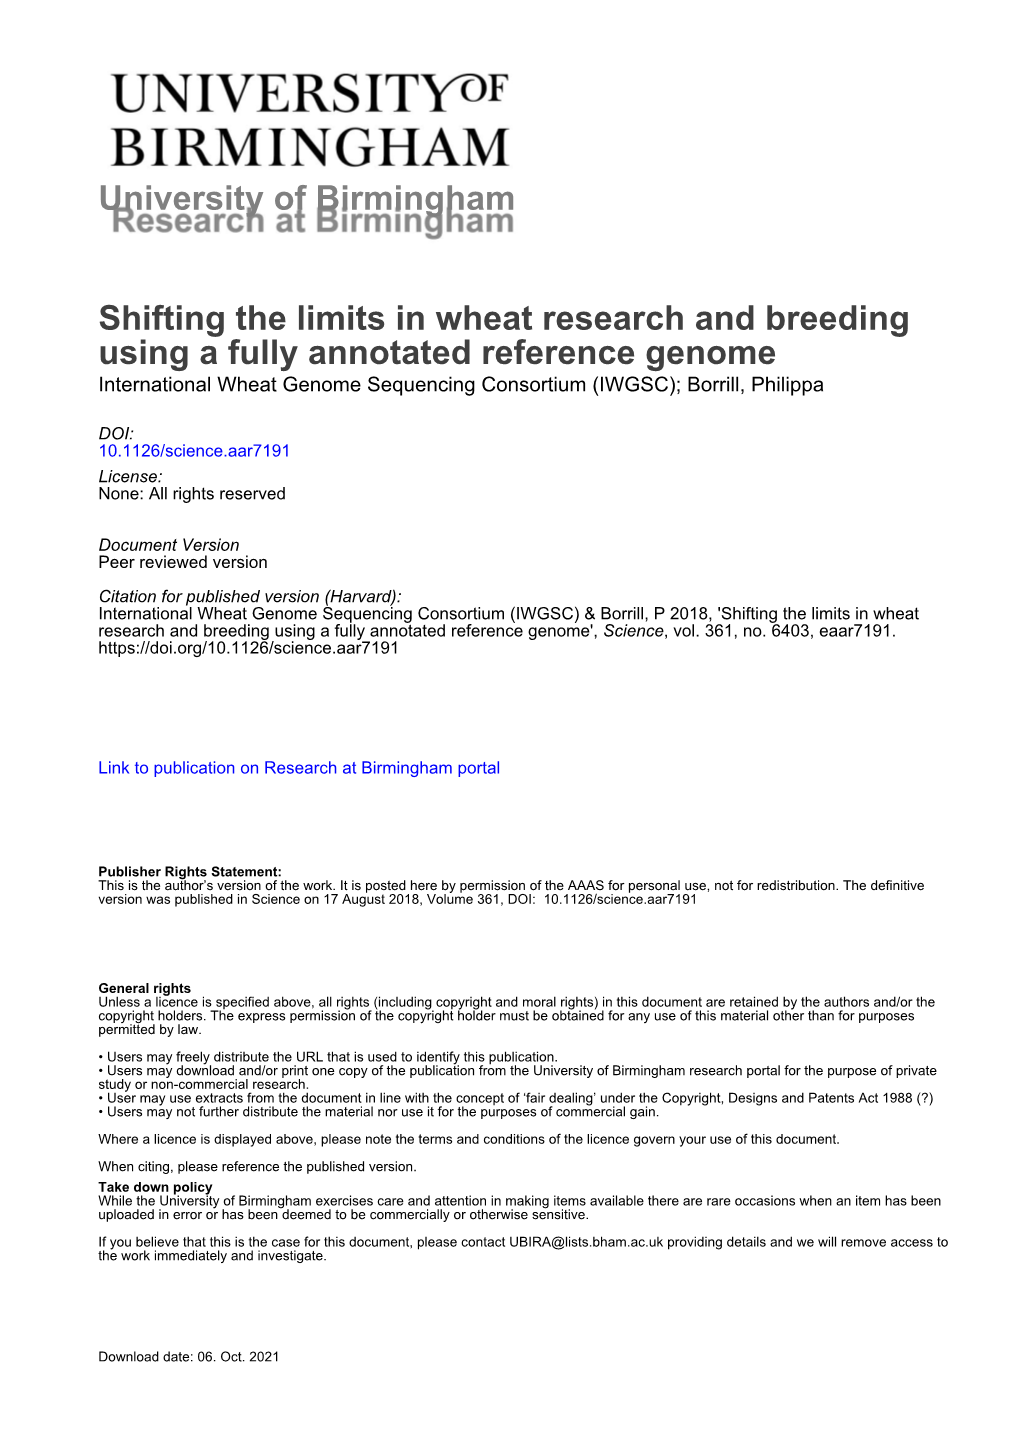 University of Birmingham Shifting the Limits in Wheat Research And